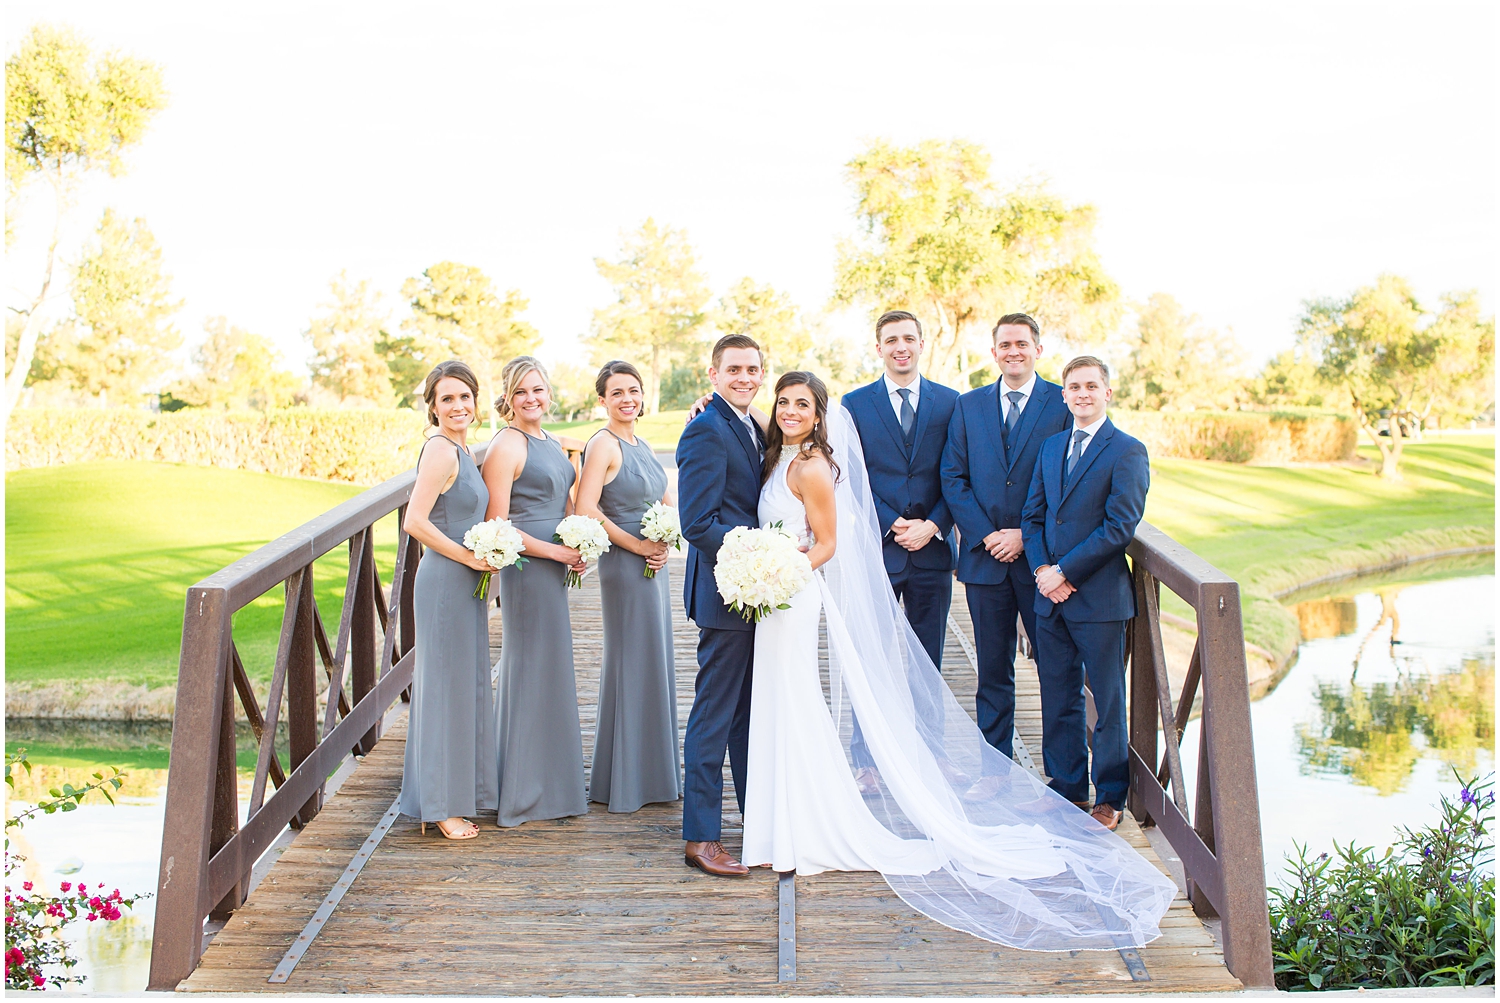 bride in demetrios bridal gown racerback with sheer beading with white hydrangeas bouquet with bridesmaids in gray dresses and groom and groomsmen in navy blue suit with light blue tie wedding party picture